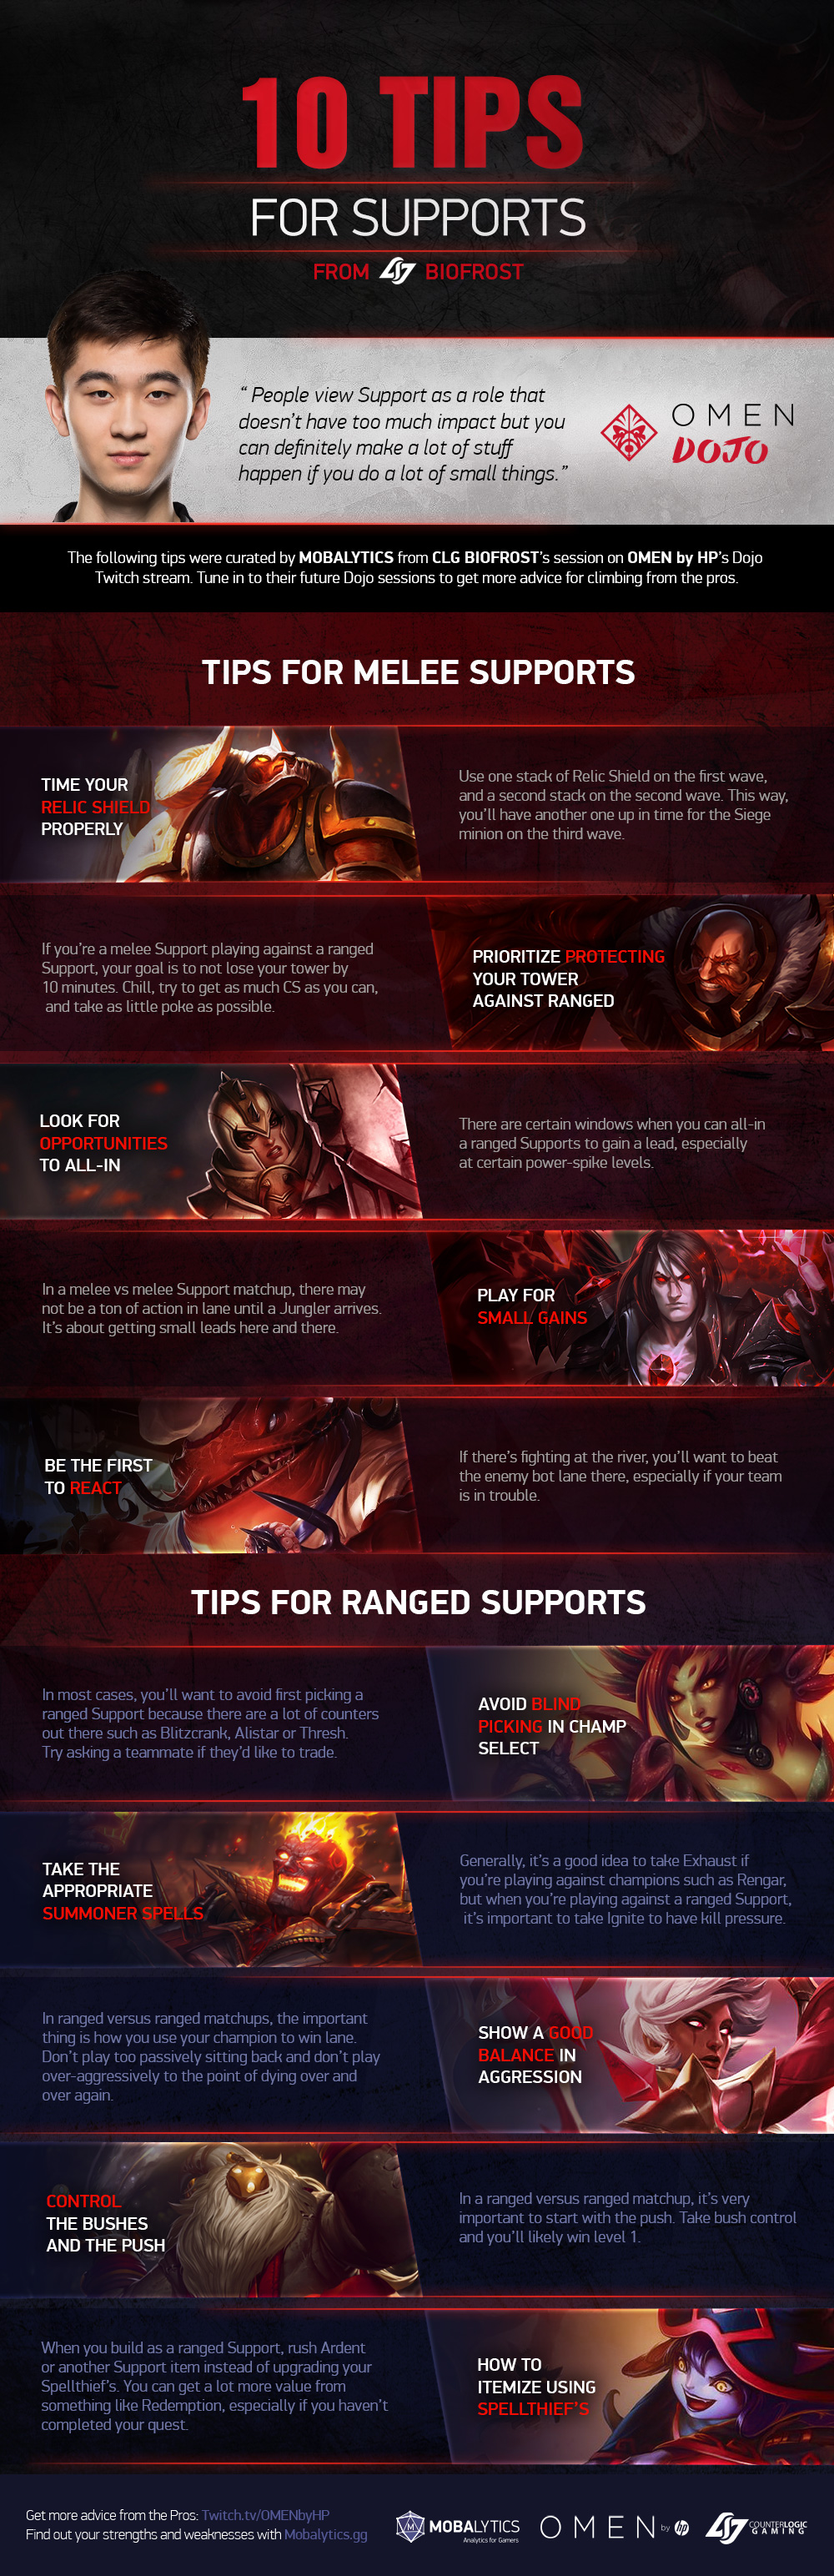 10 Tips for Supports Infographic